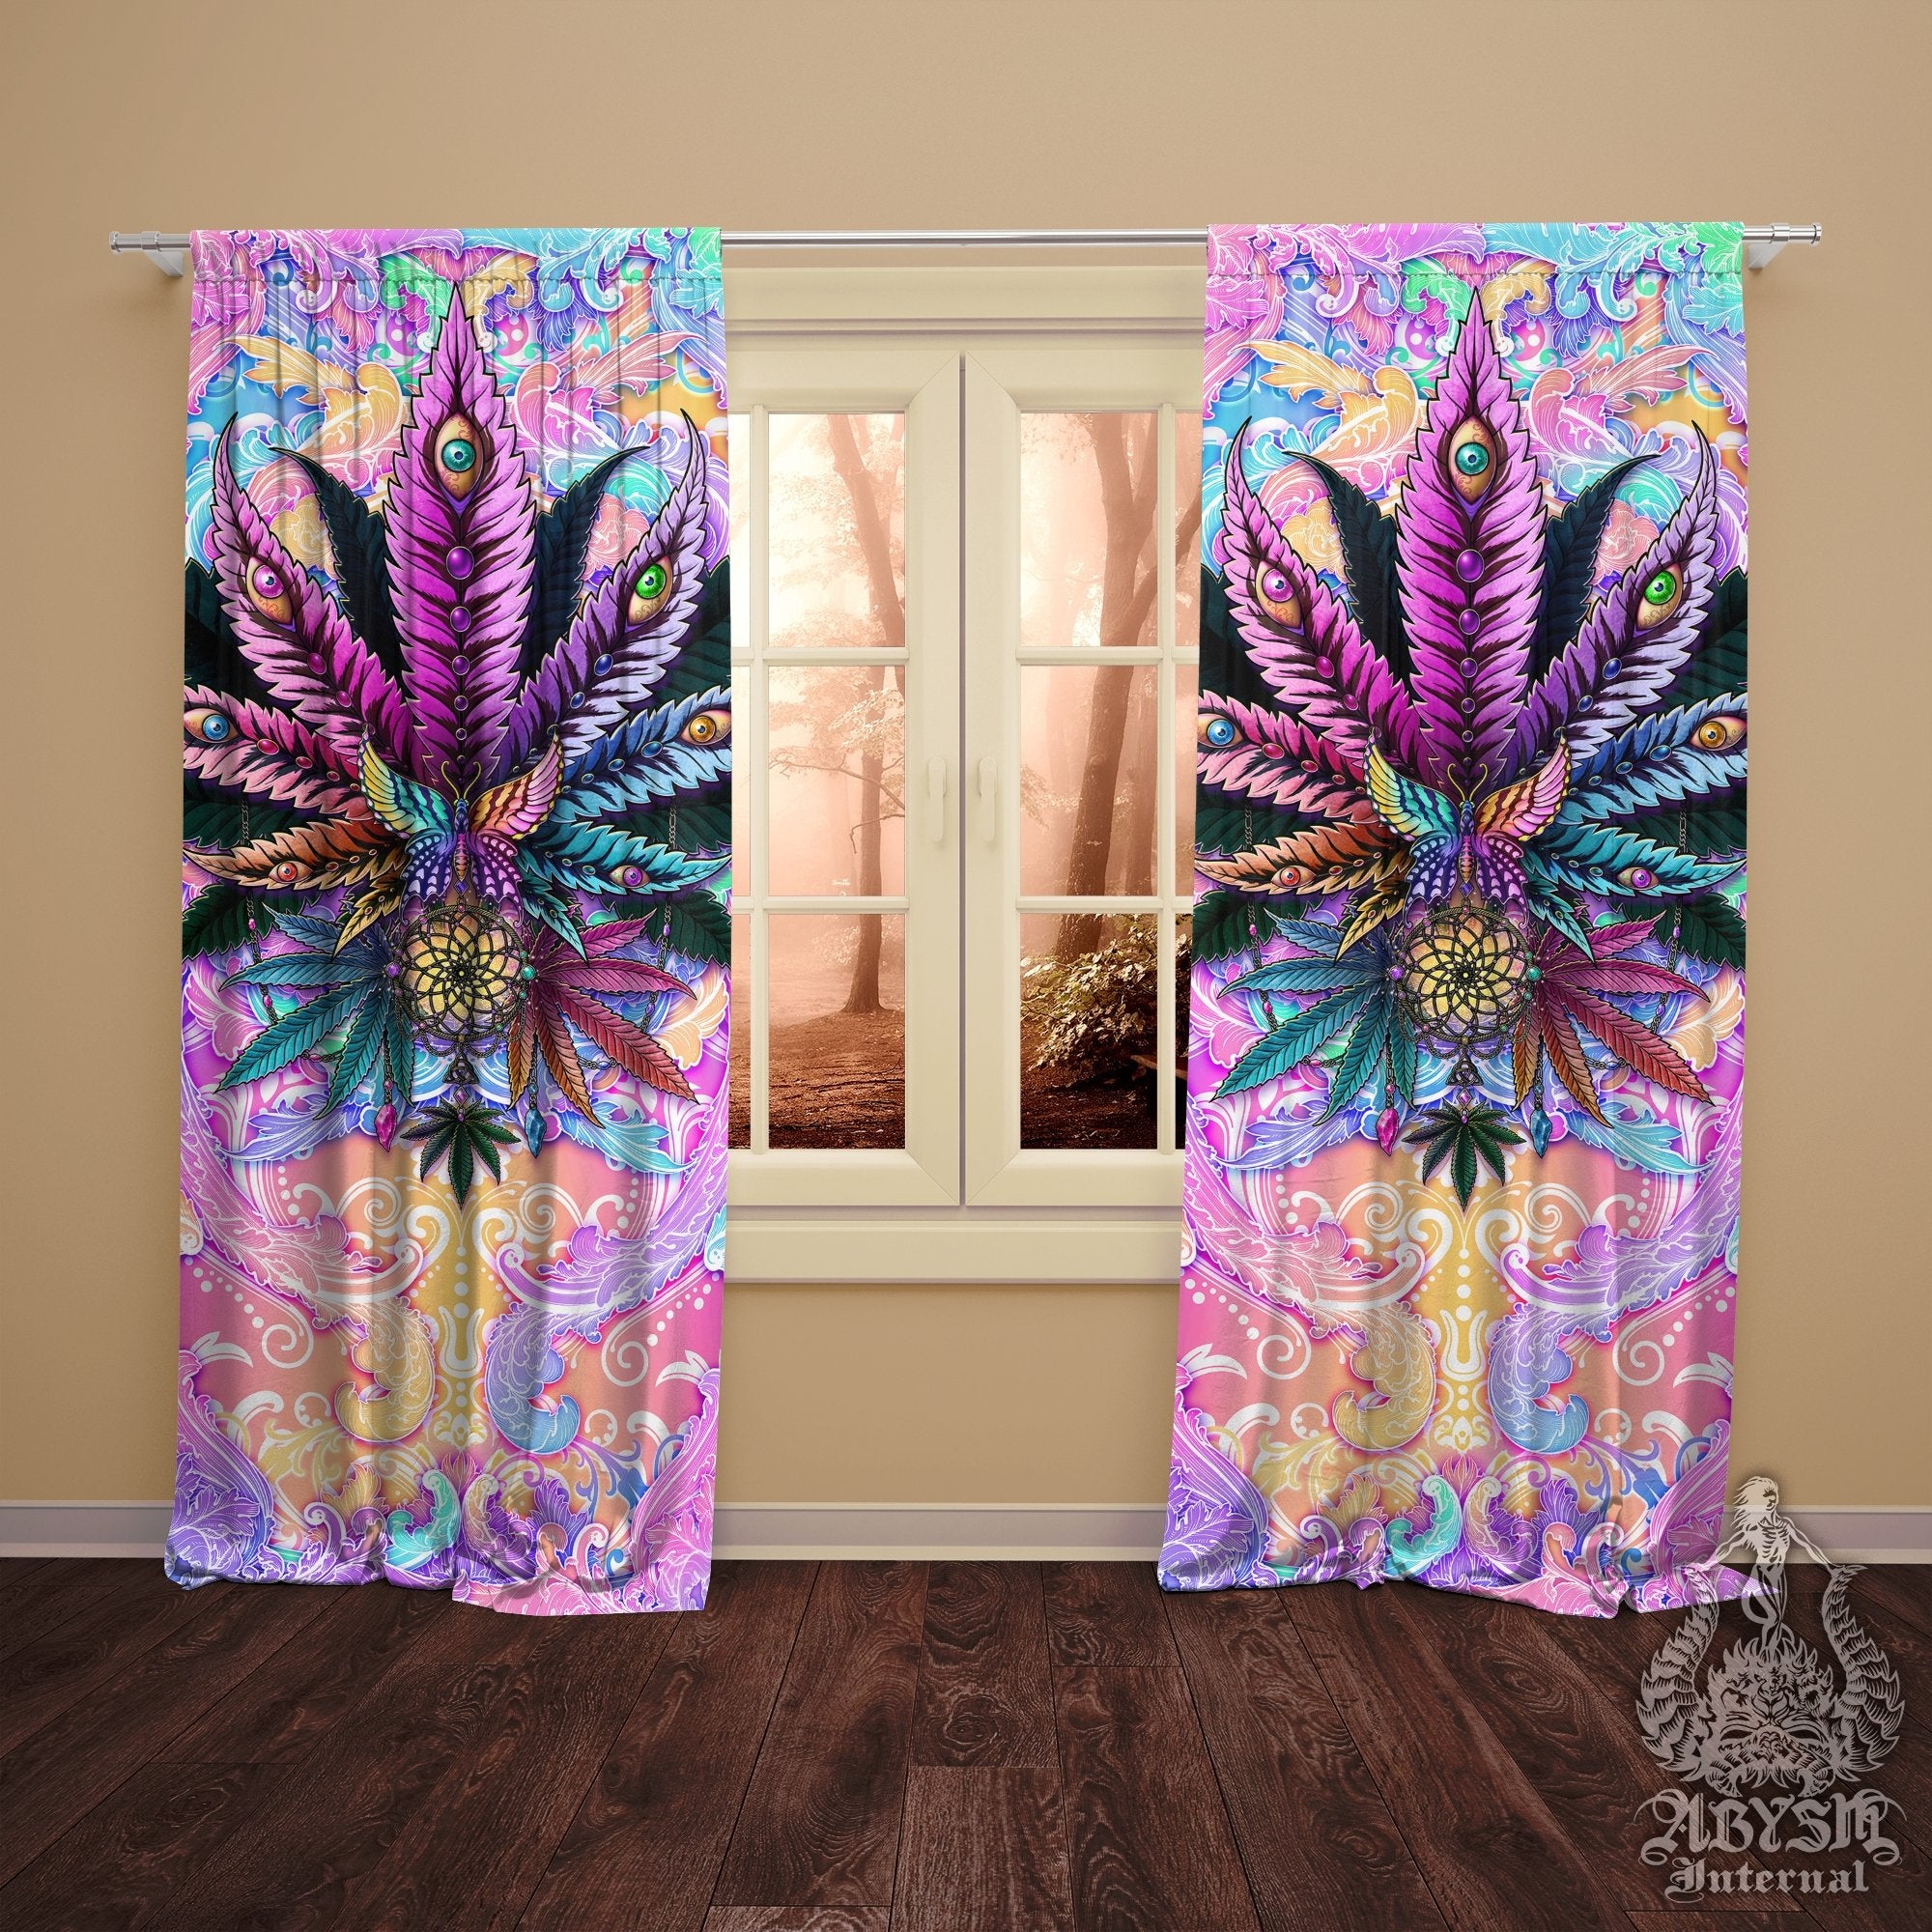 Weed Blackout Curtains, Cannabis Home and Shop Decor, Long Window Panels, Aesthetic Print, Girly 420 Room Art - Pastel Black - Abysm Internal